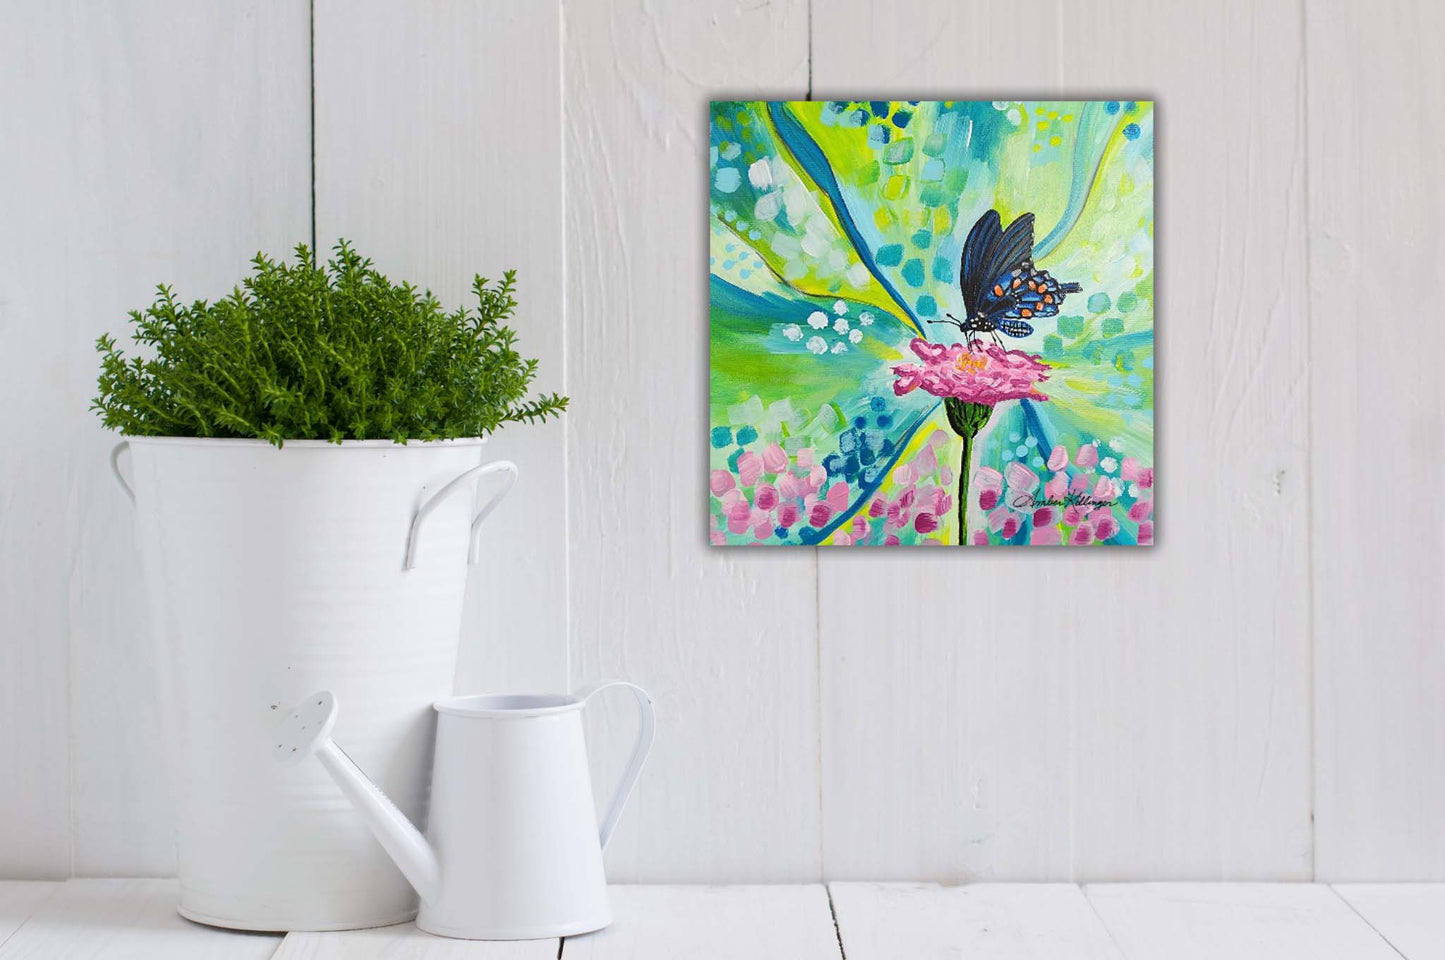 Energy of Spring - Butterfly Original Painting 10x10